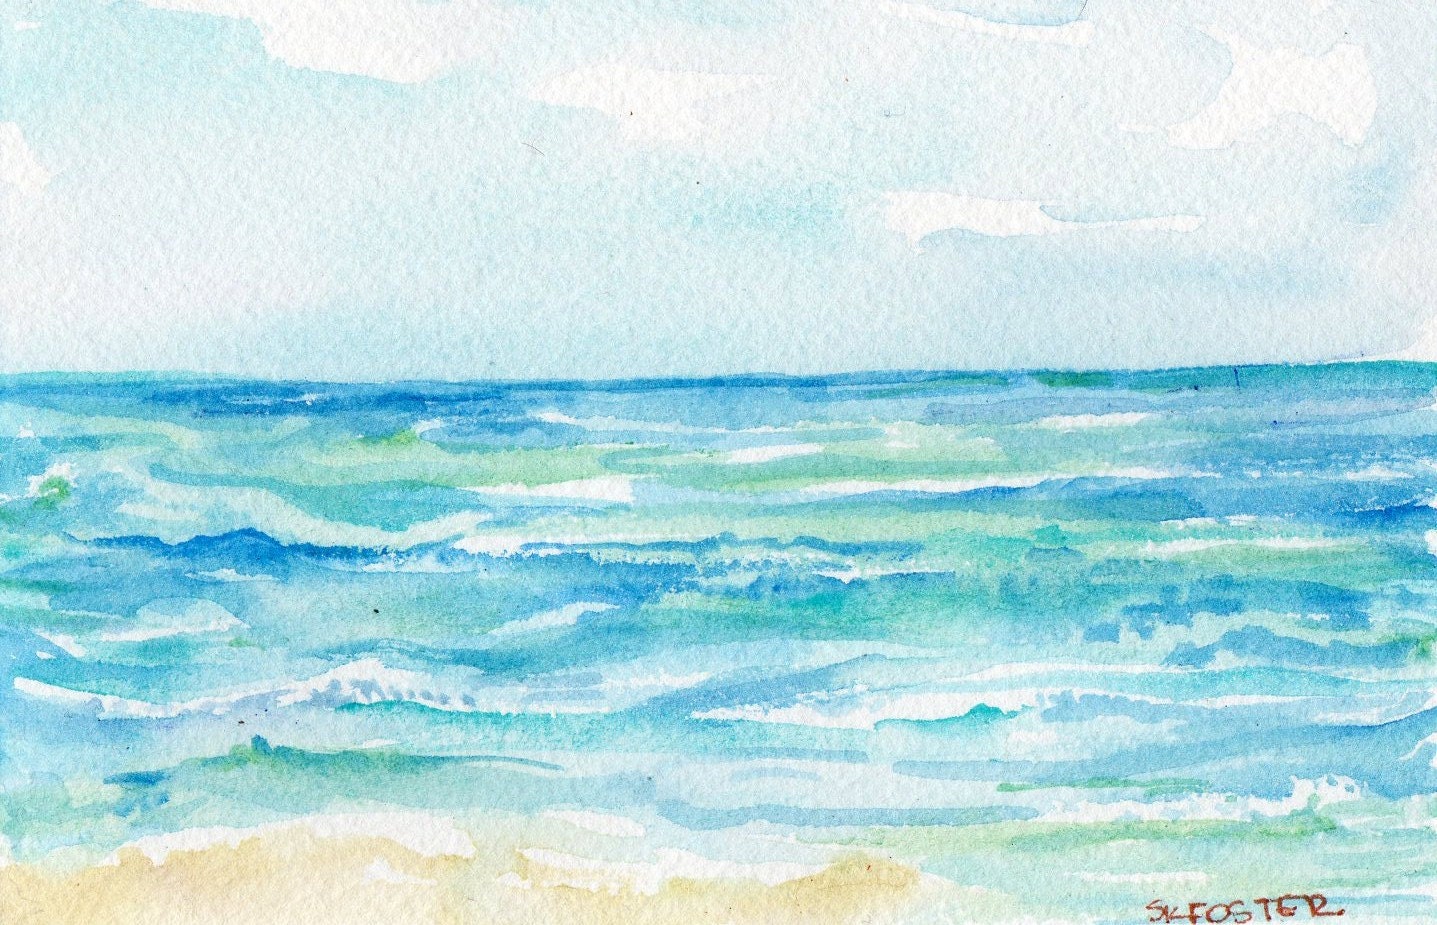 Original Ocean waves watercolor 4 by 6 inches - SharonFosterArt